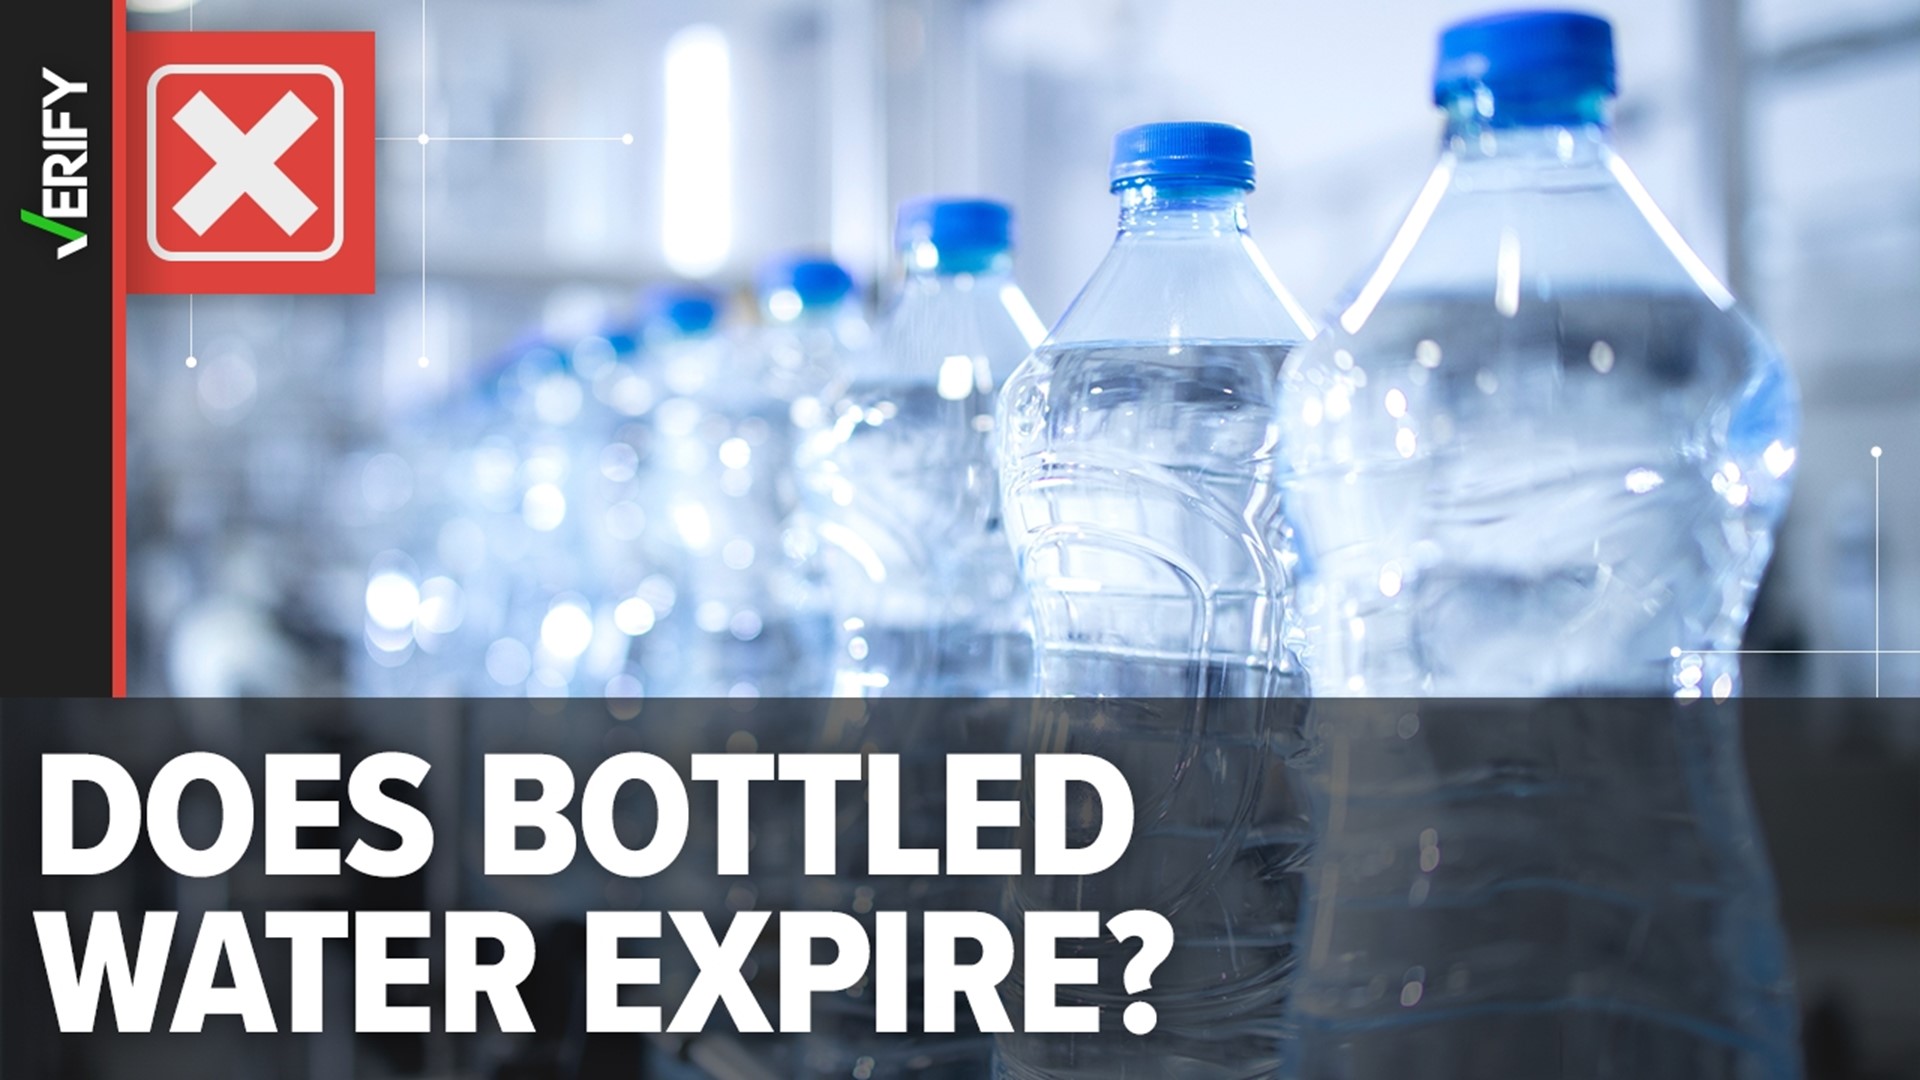 Plastic water bottles can leach small amounts of the chemicals BPA and antimony into the water if left out in the heat for too long. Here’s what to know.